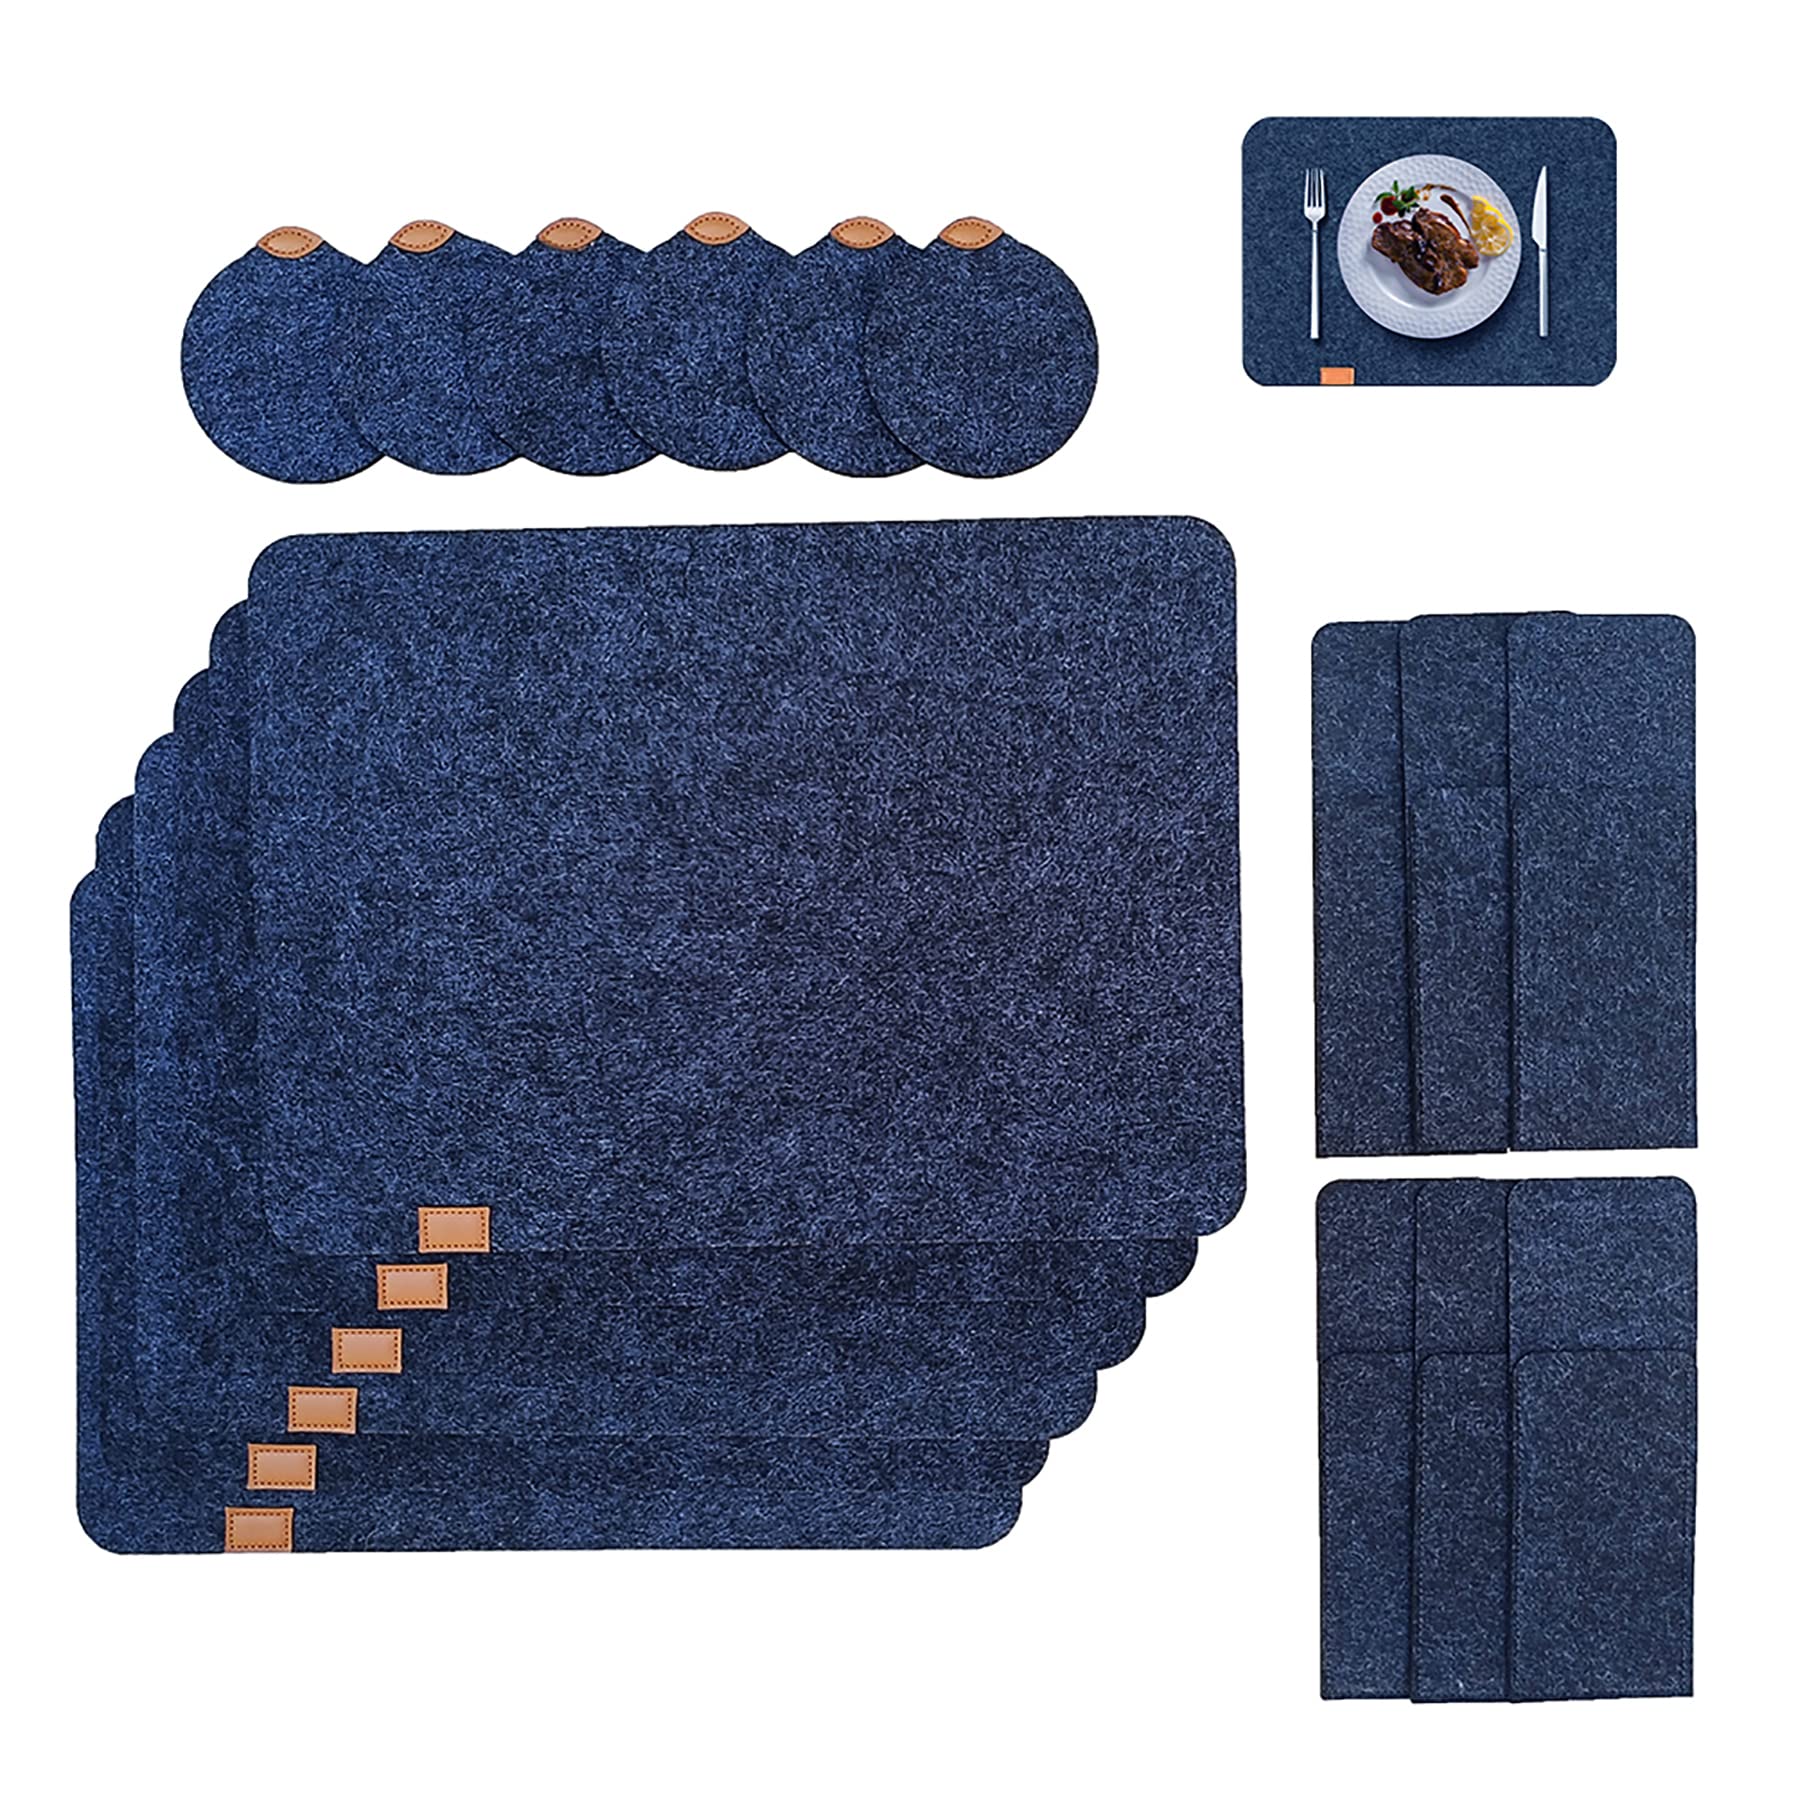 6 sets of placemats, washable felt table mat, anti-slip, heat and stain resistant kitchen table mat easy to clean